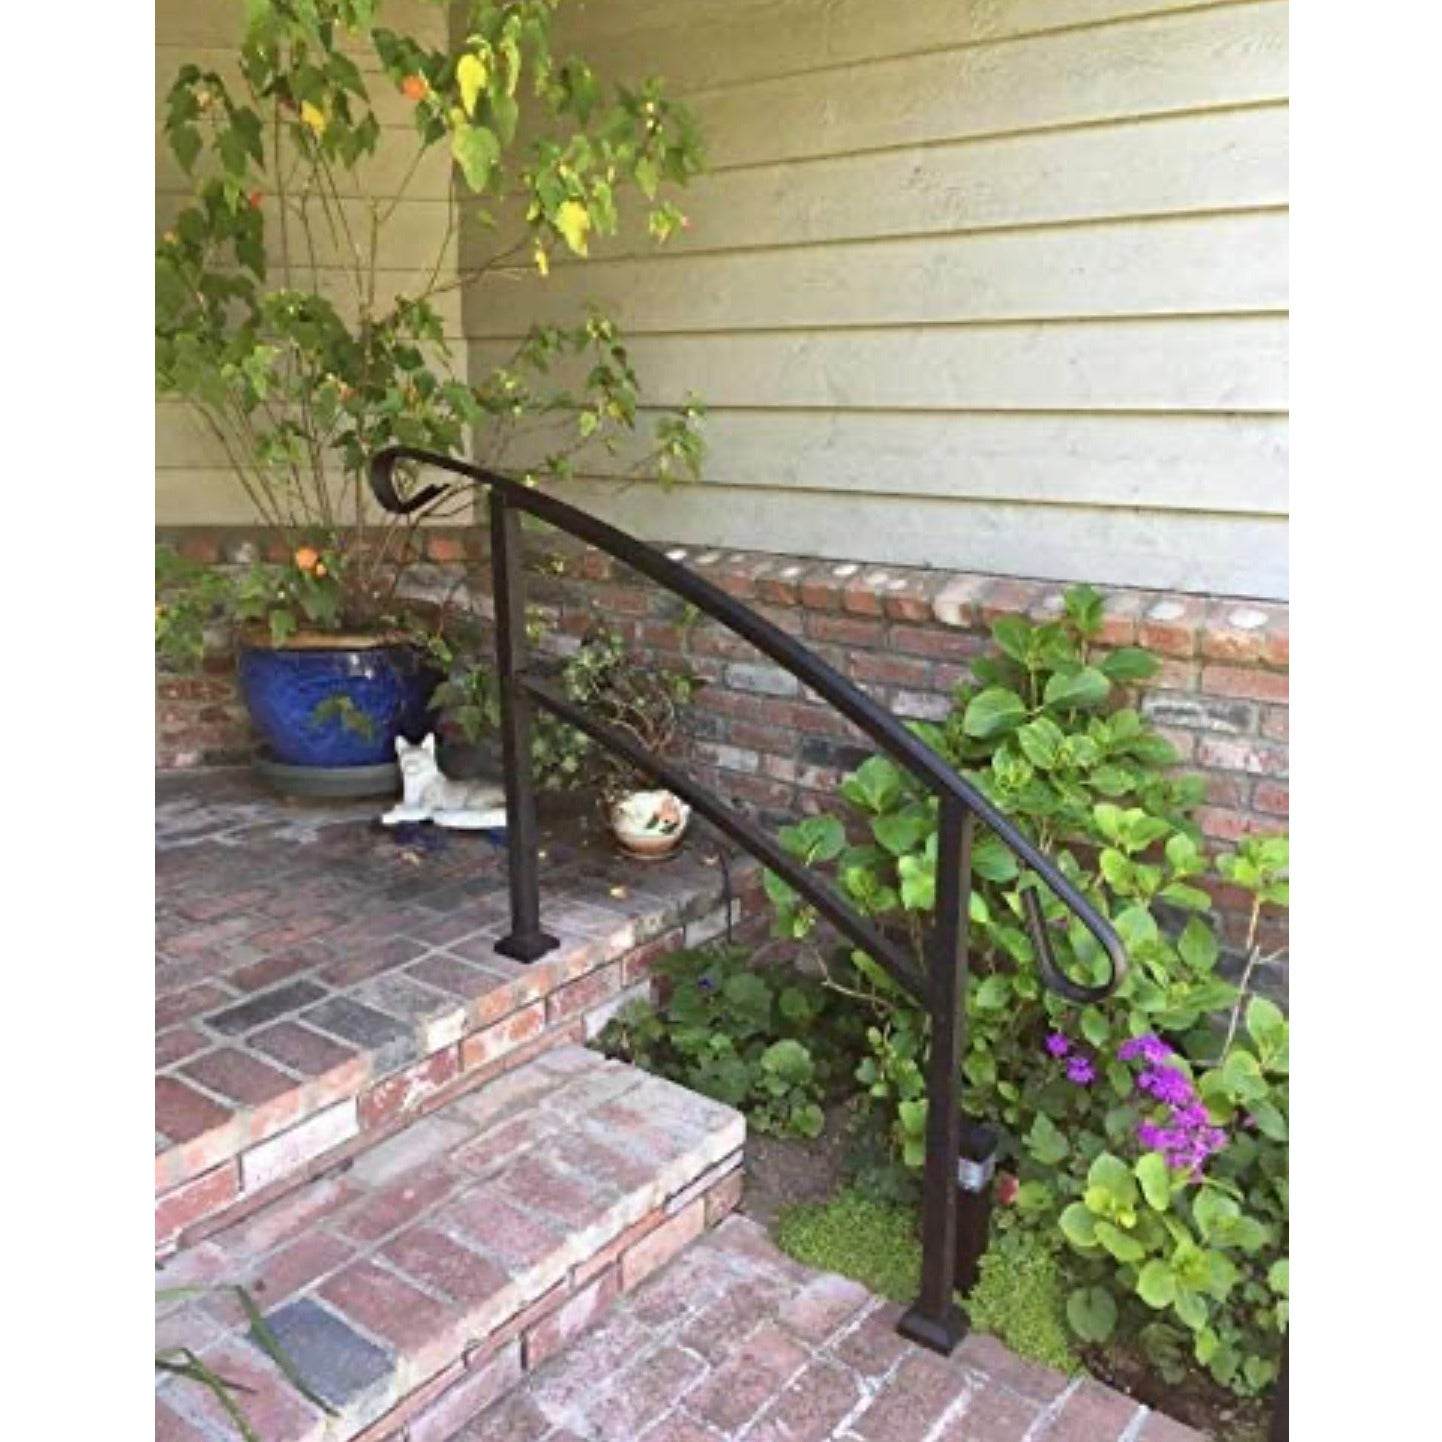 Handrails for Outdoor Steps,3 Step Handrail Fits 1 to 3 Steps Mattle Wrought Iron Handrail Stair Rail with Installation Kit Hand Rails for Outdoor Steps Black - Selzalot